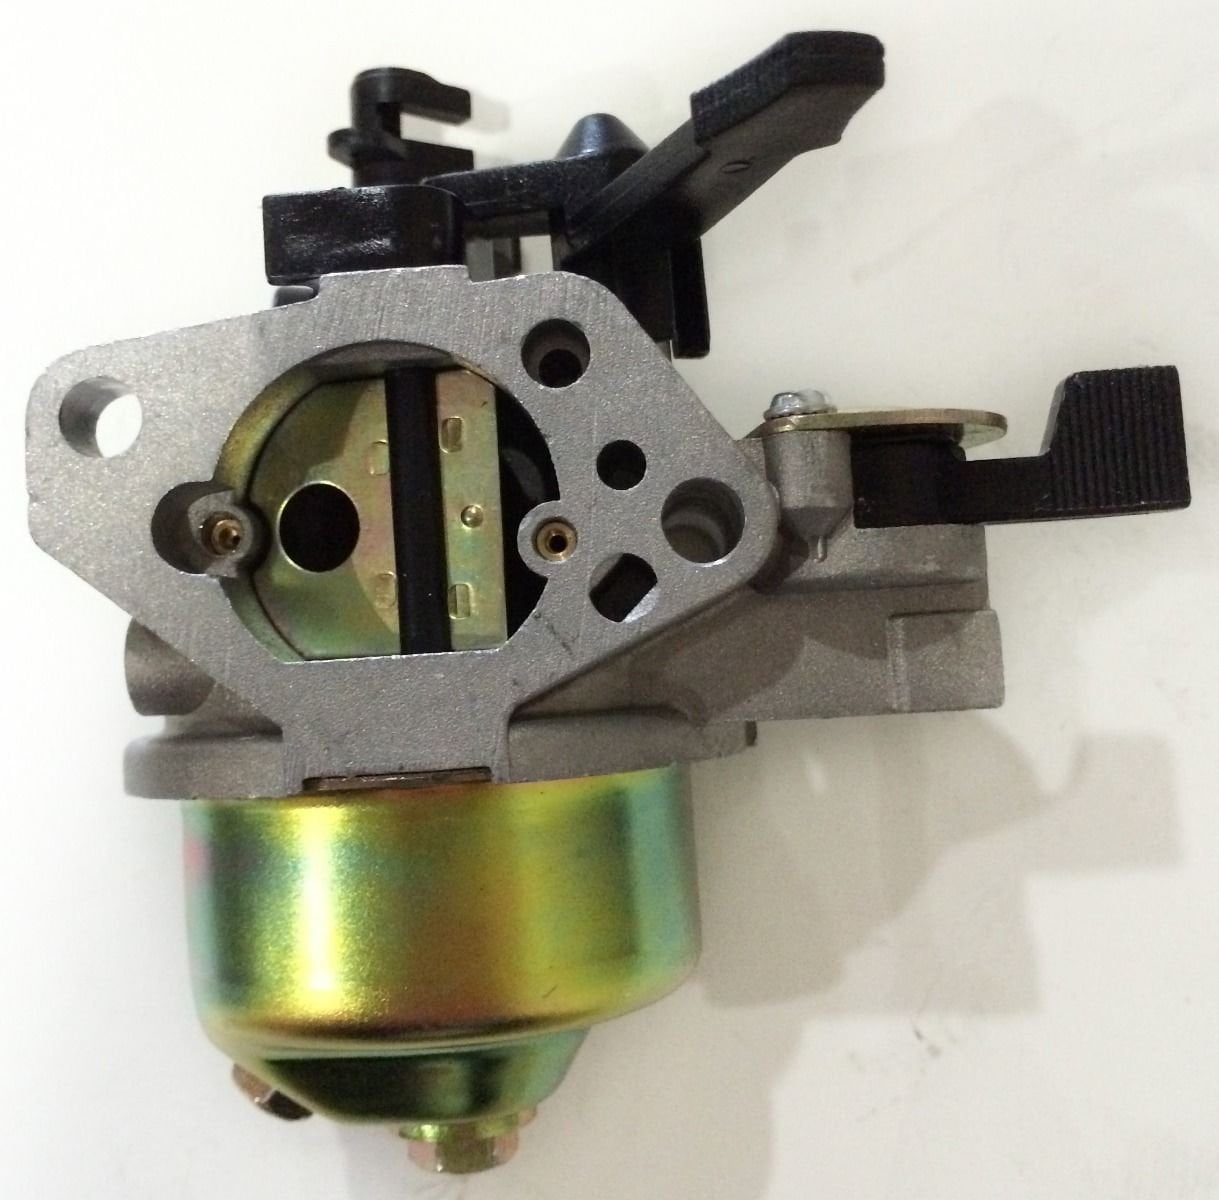 Details about   Carburetor Carb For Generac PW 1292-2 2300 PSI Pressure Washer 